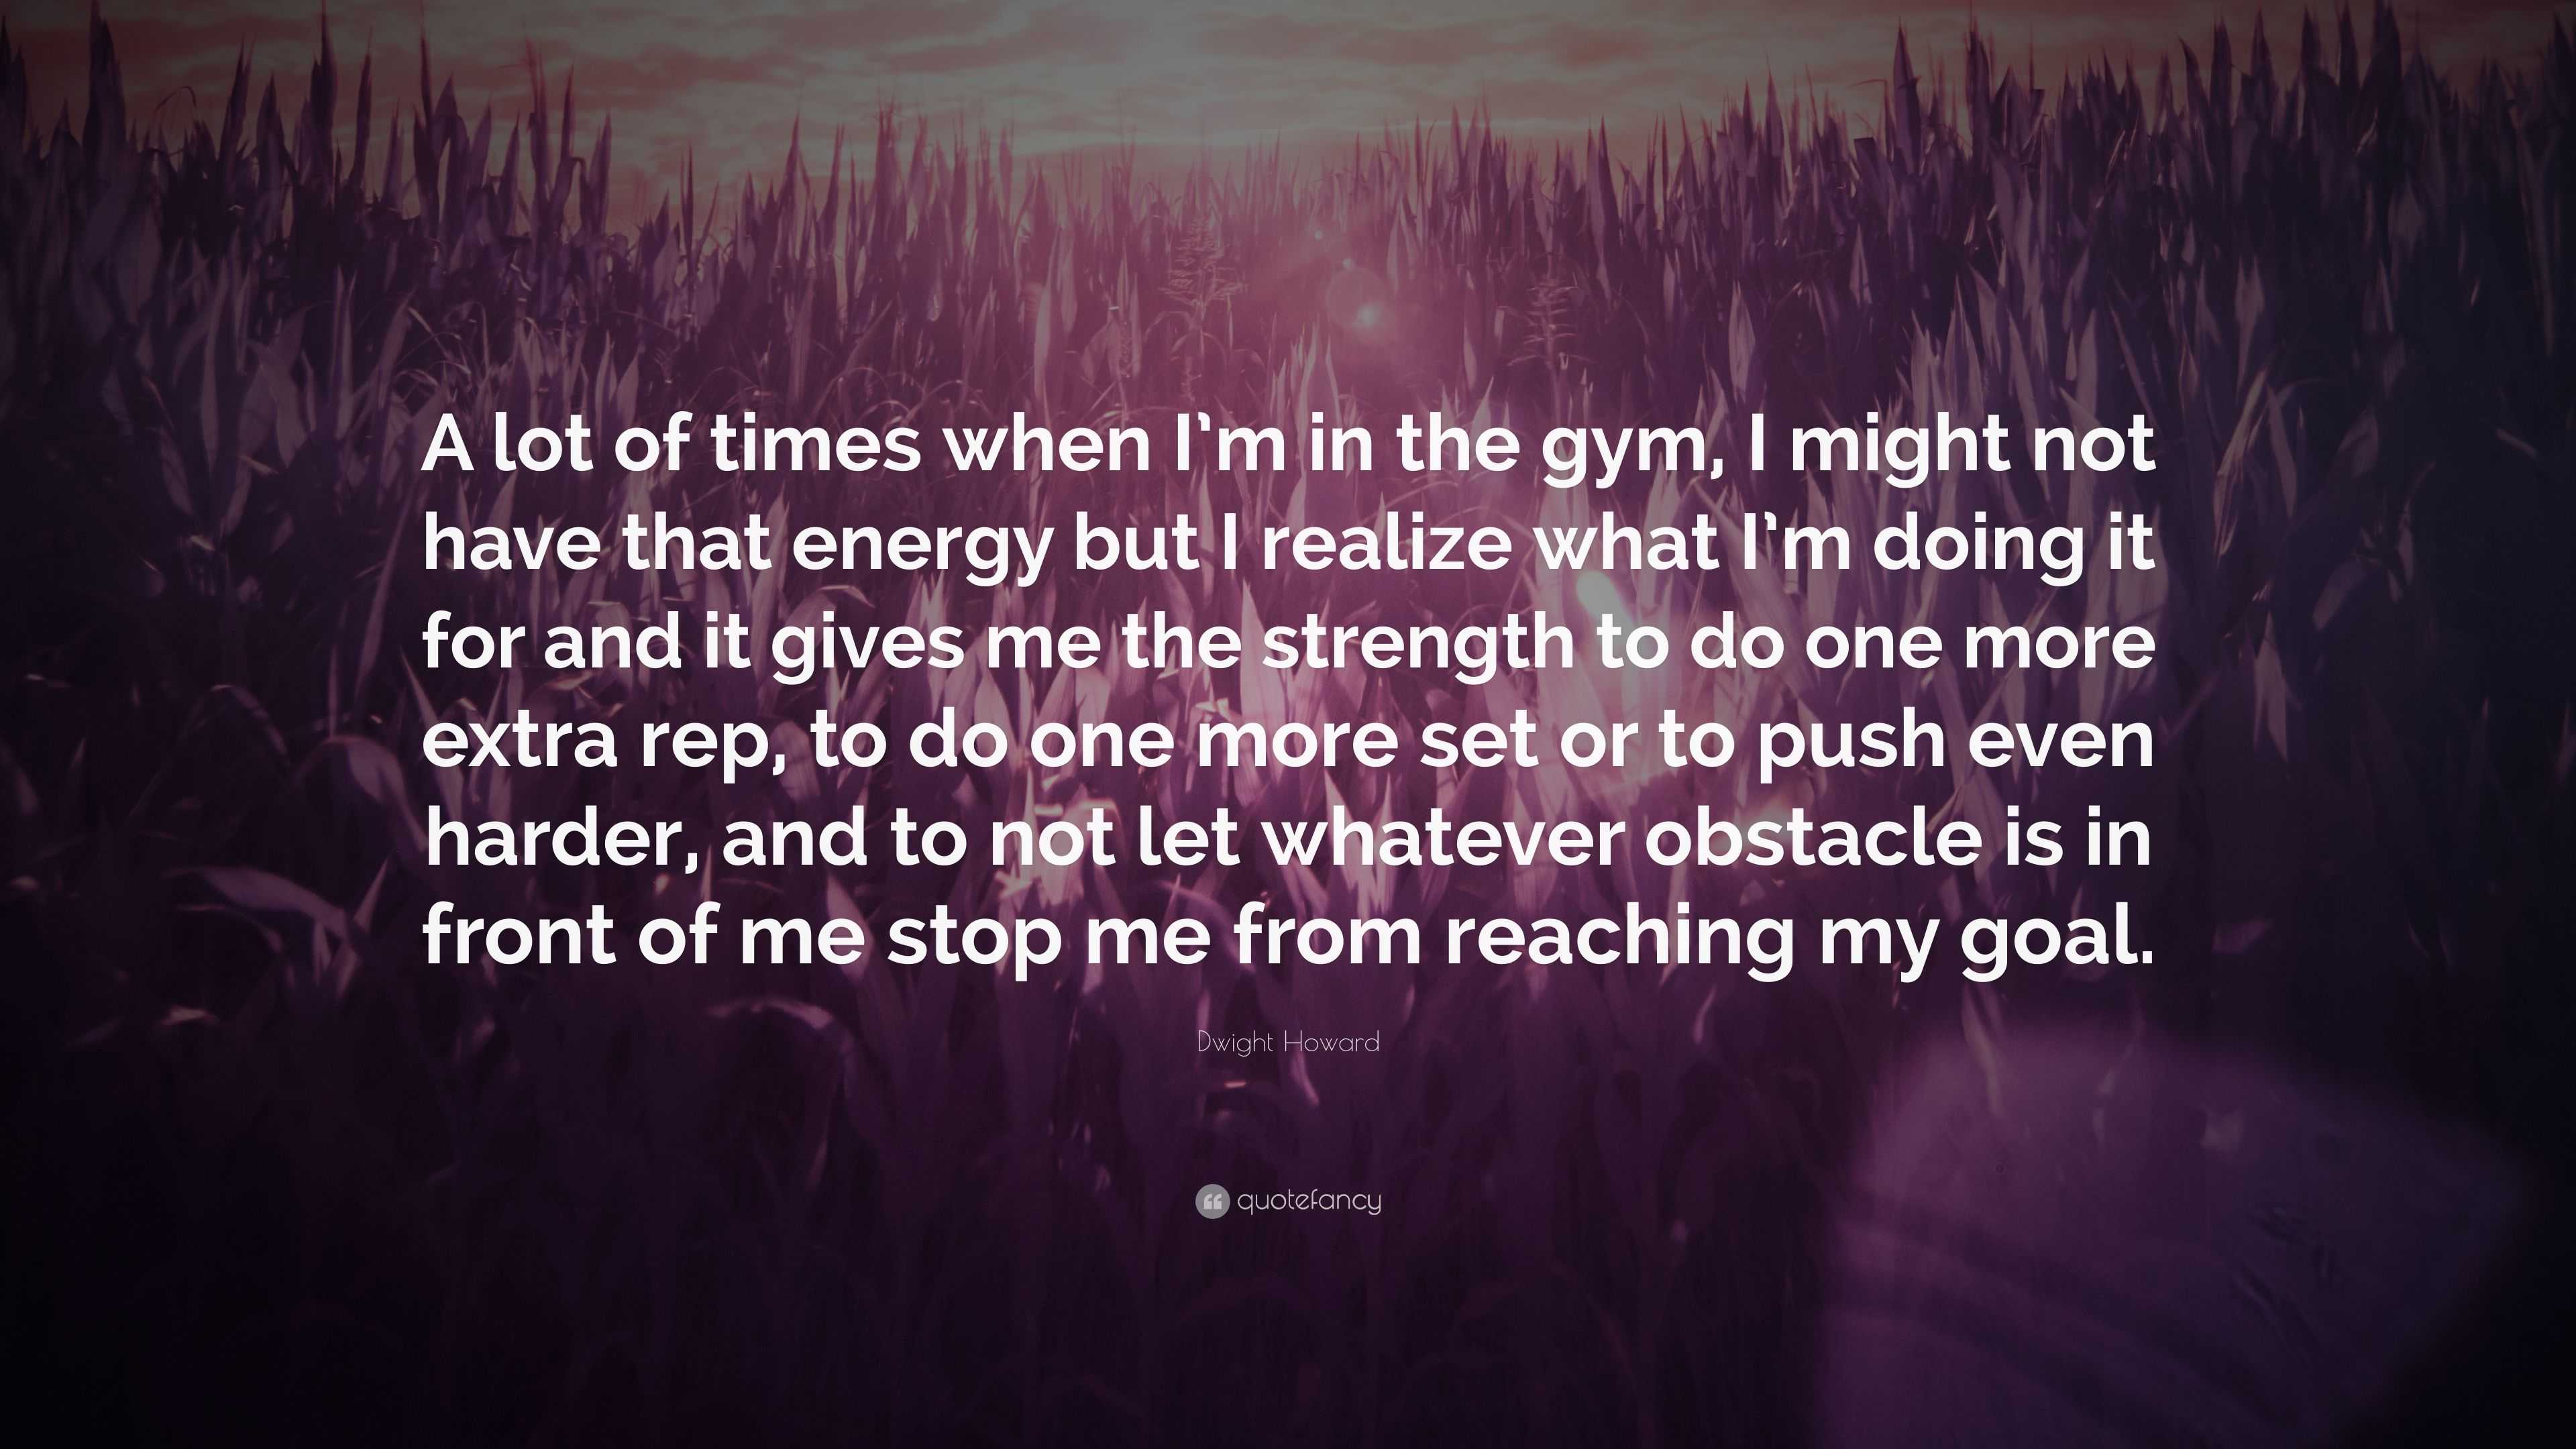 Dwight Howard Quote A Lot Of Times When I M In The Gym I Might Not Have That Energy But I Realize What I M Doing It For And It Gives Me The 7